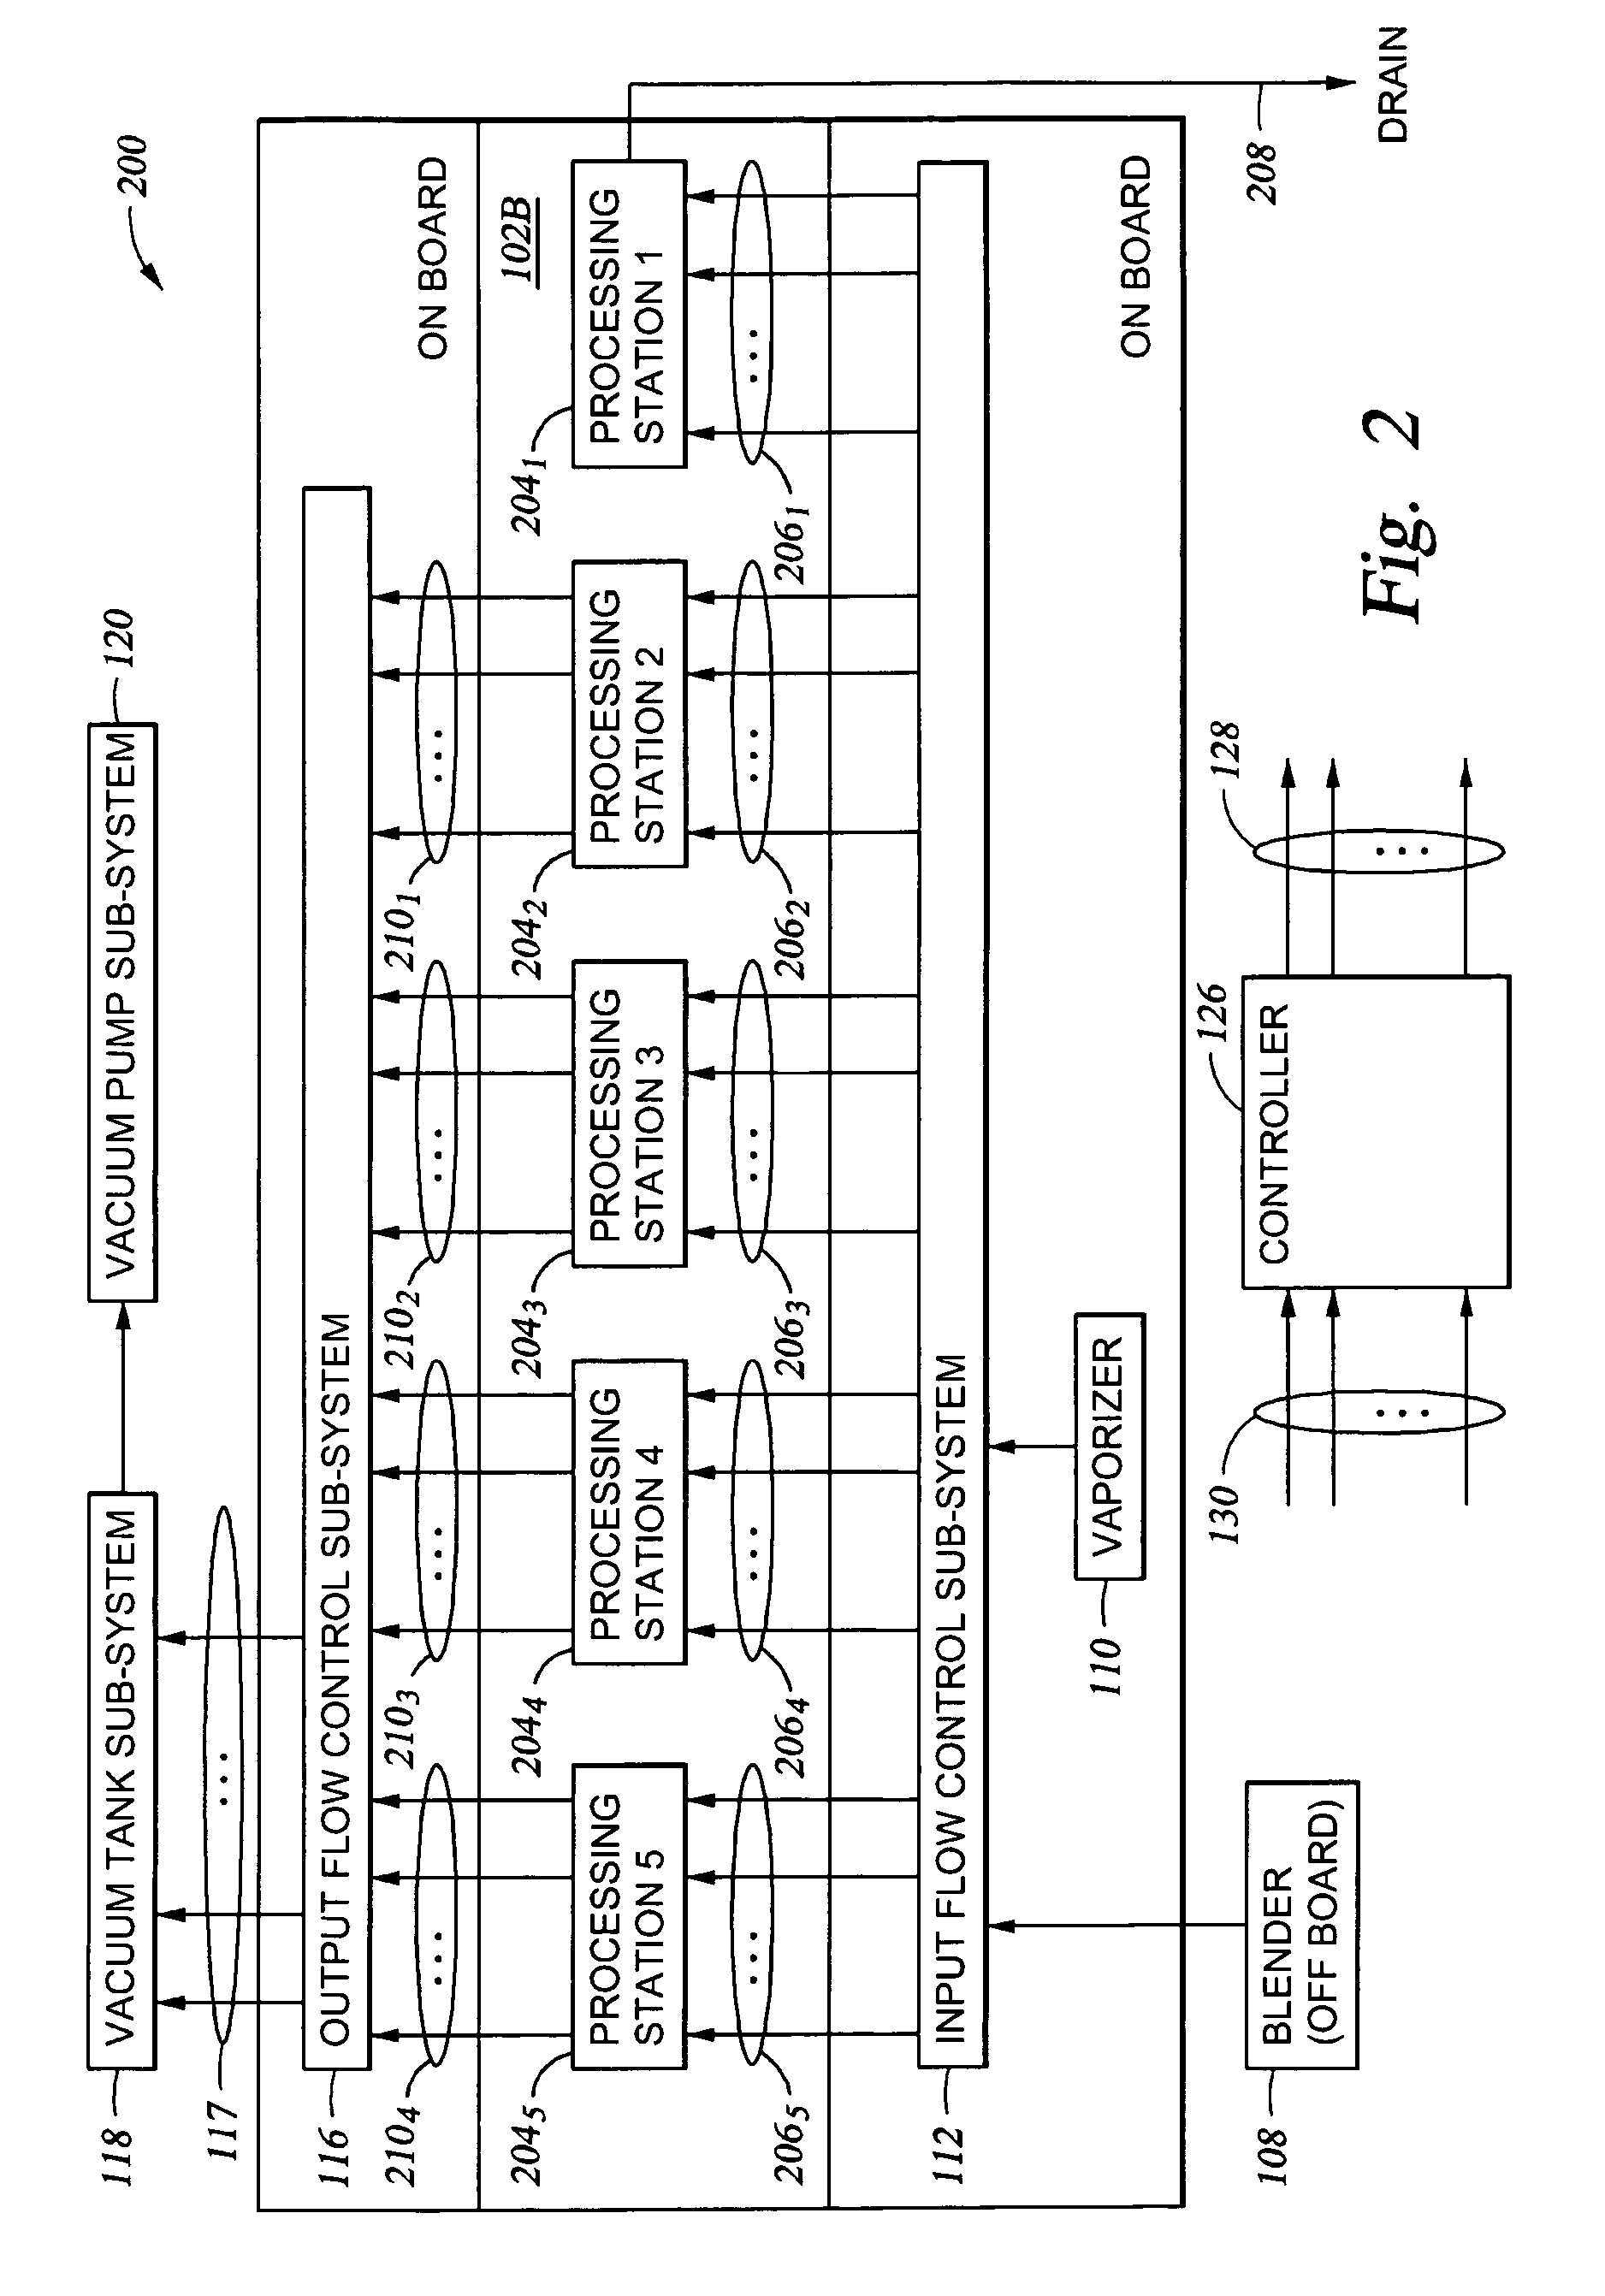 Systems and methods for managing fluids in a processing environment using a liquid ring pump and reclamation system